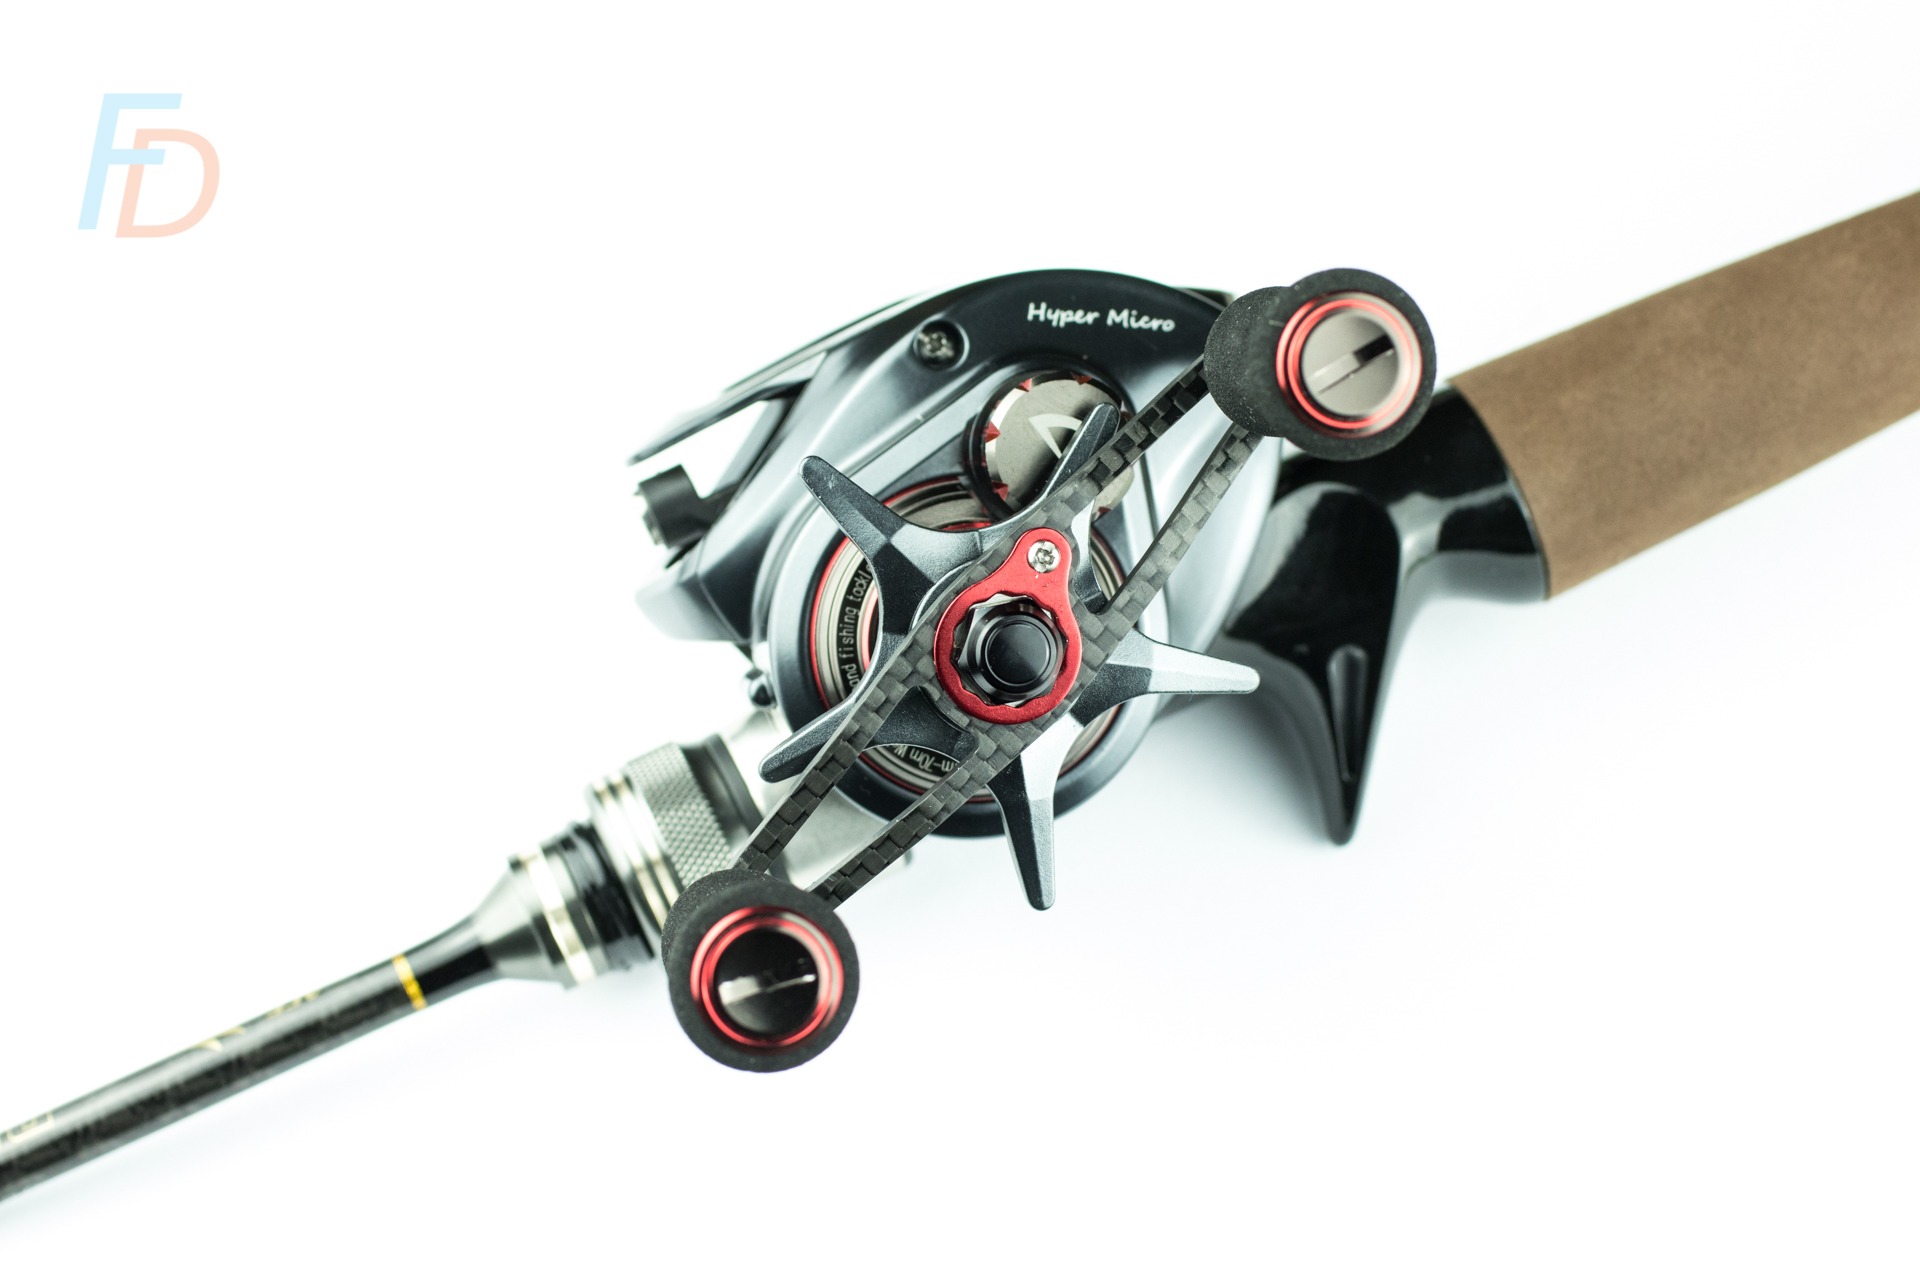 How to set up a baitcaster reel - start with the reel on your rod